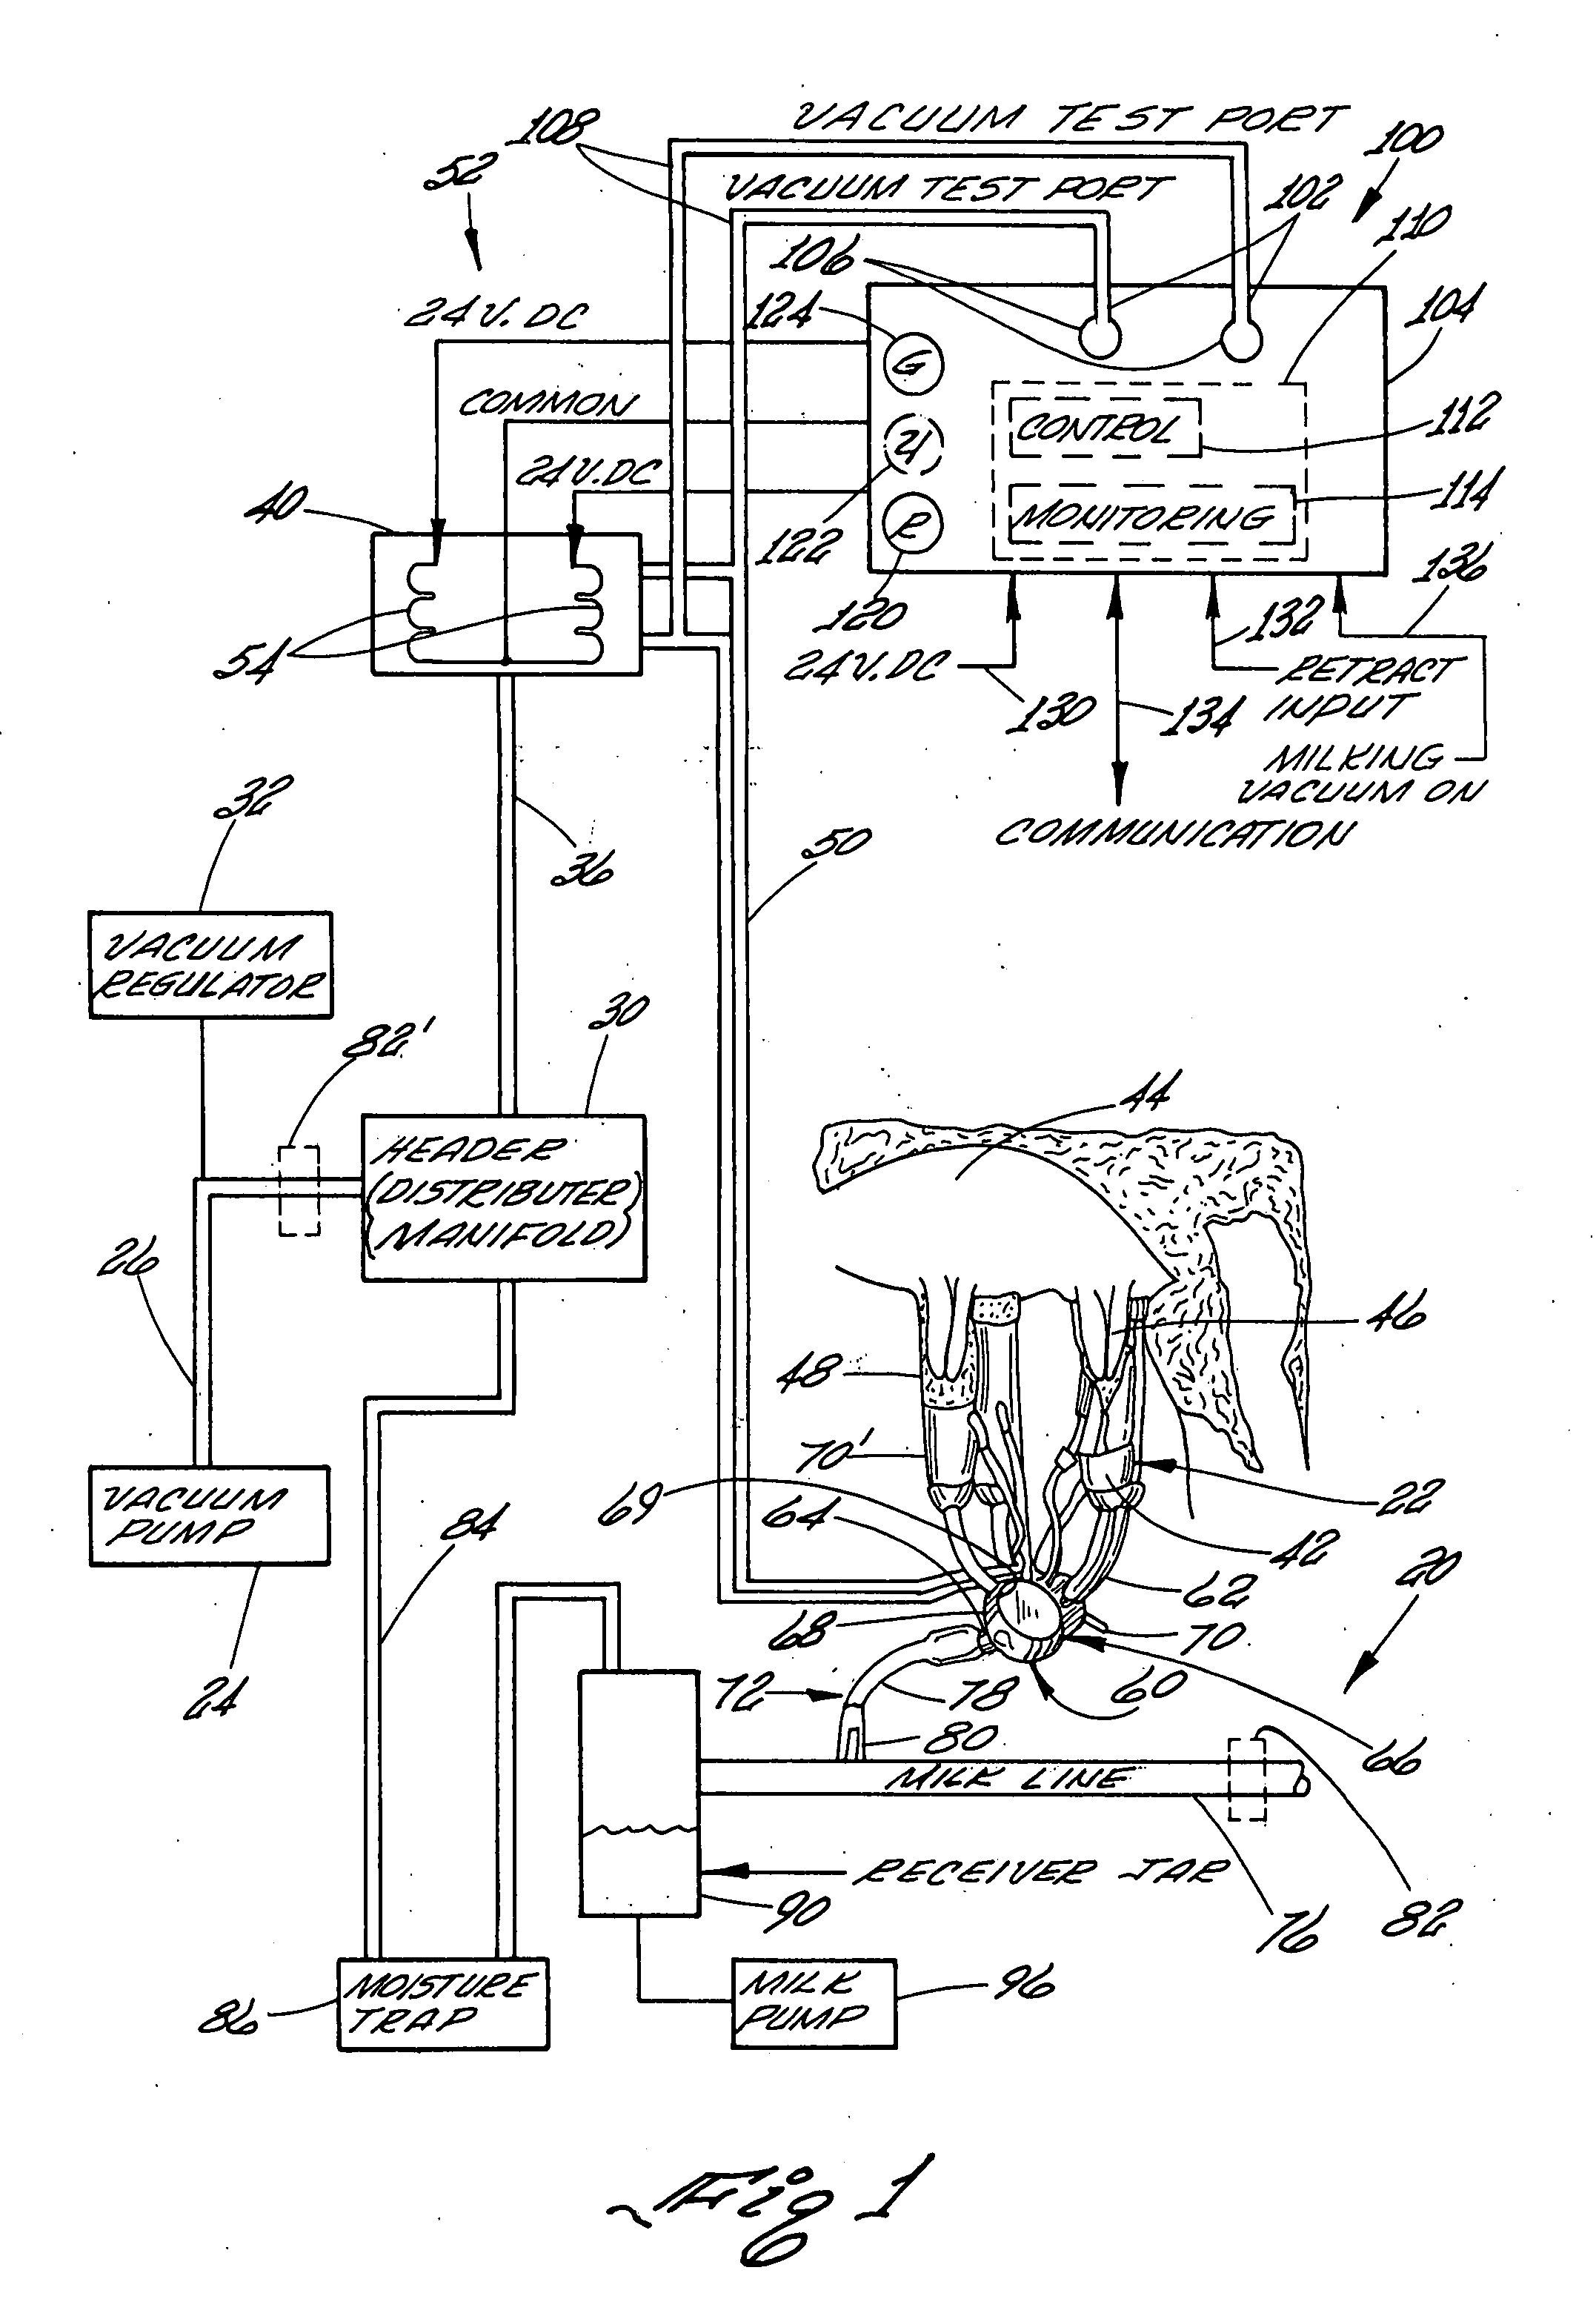 Controlling for monitoring and controlling pulsators in a milking system